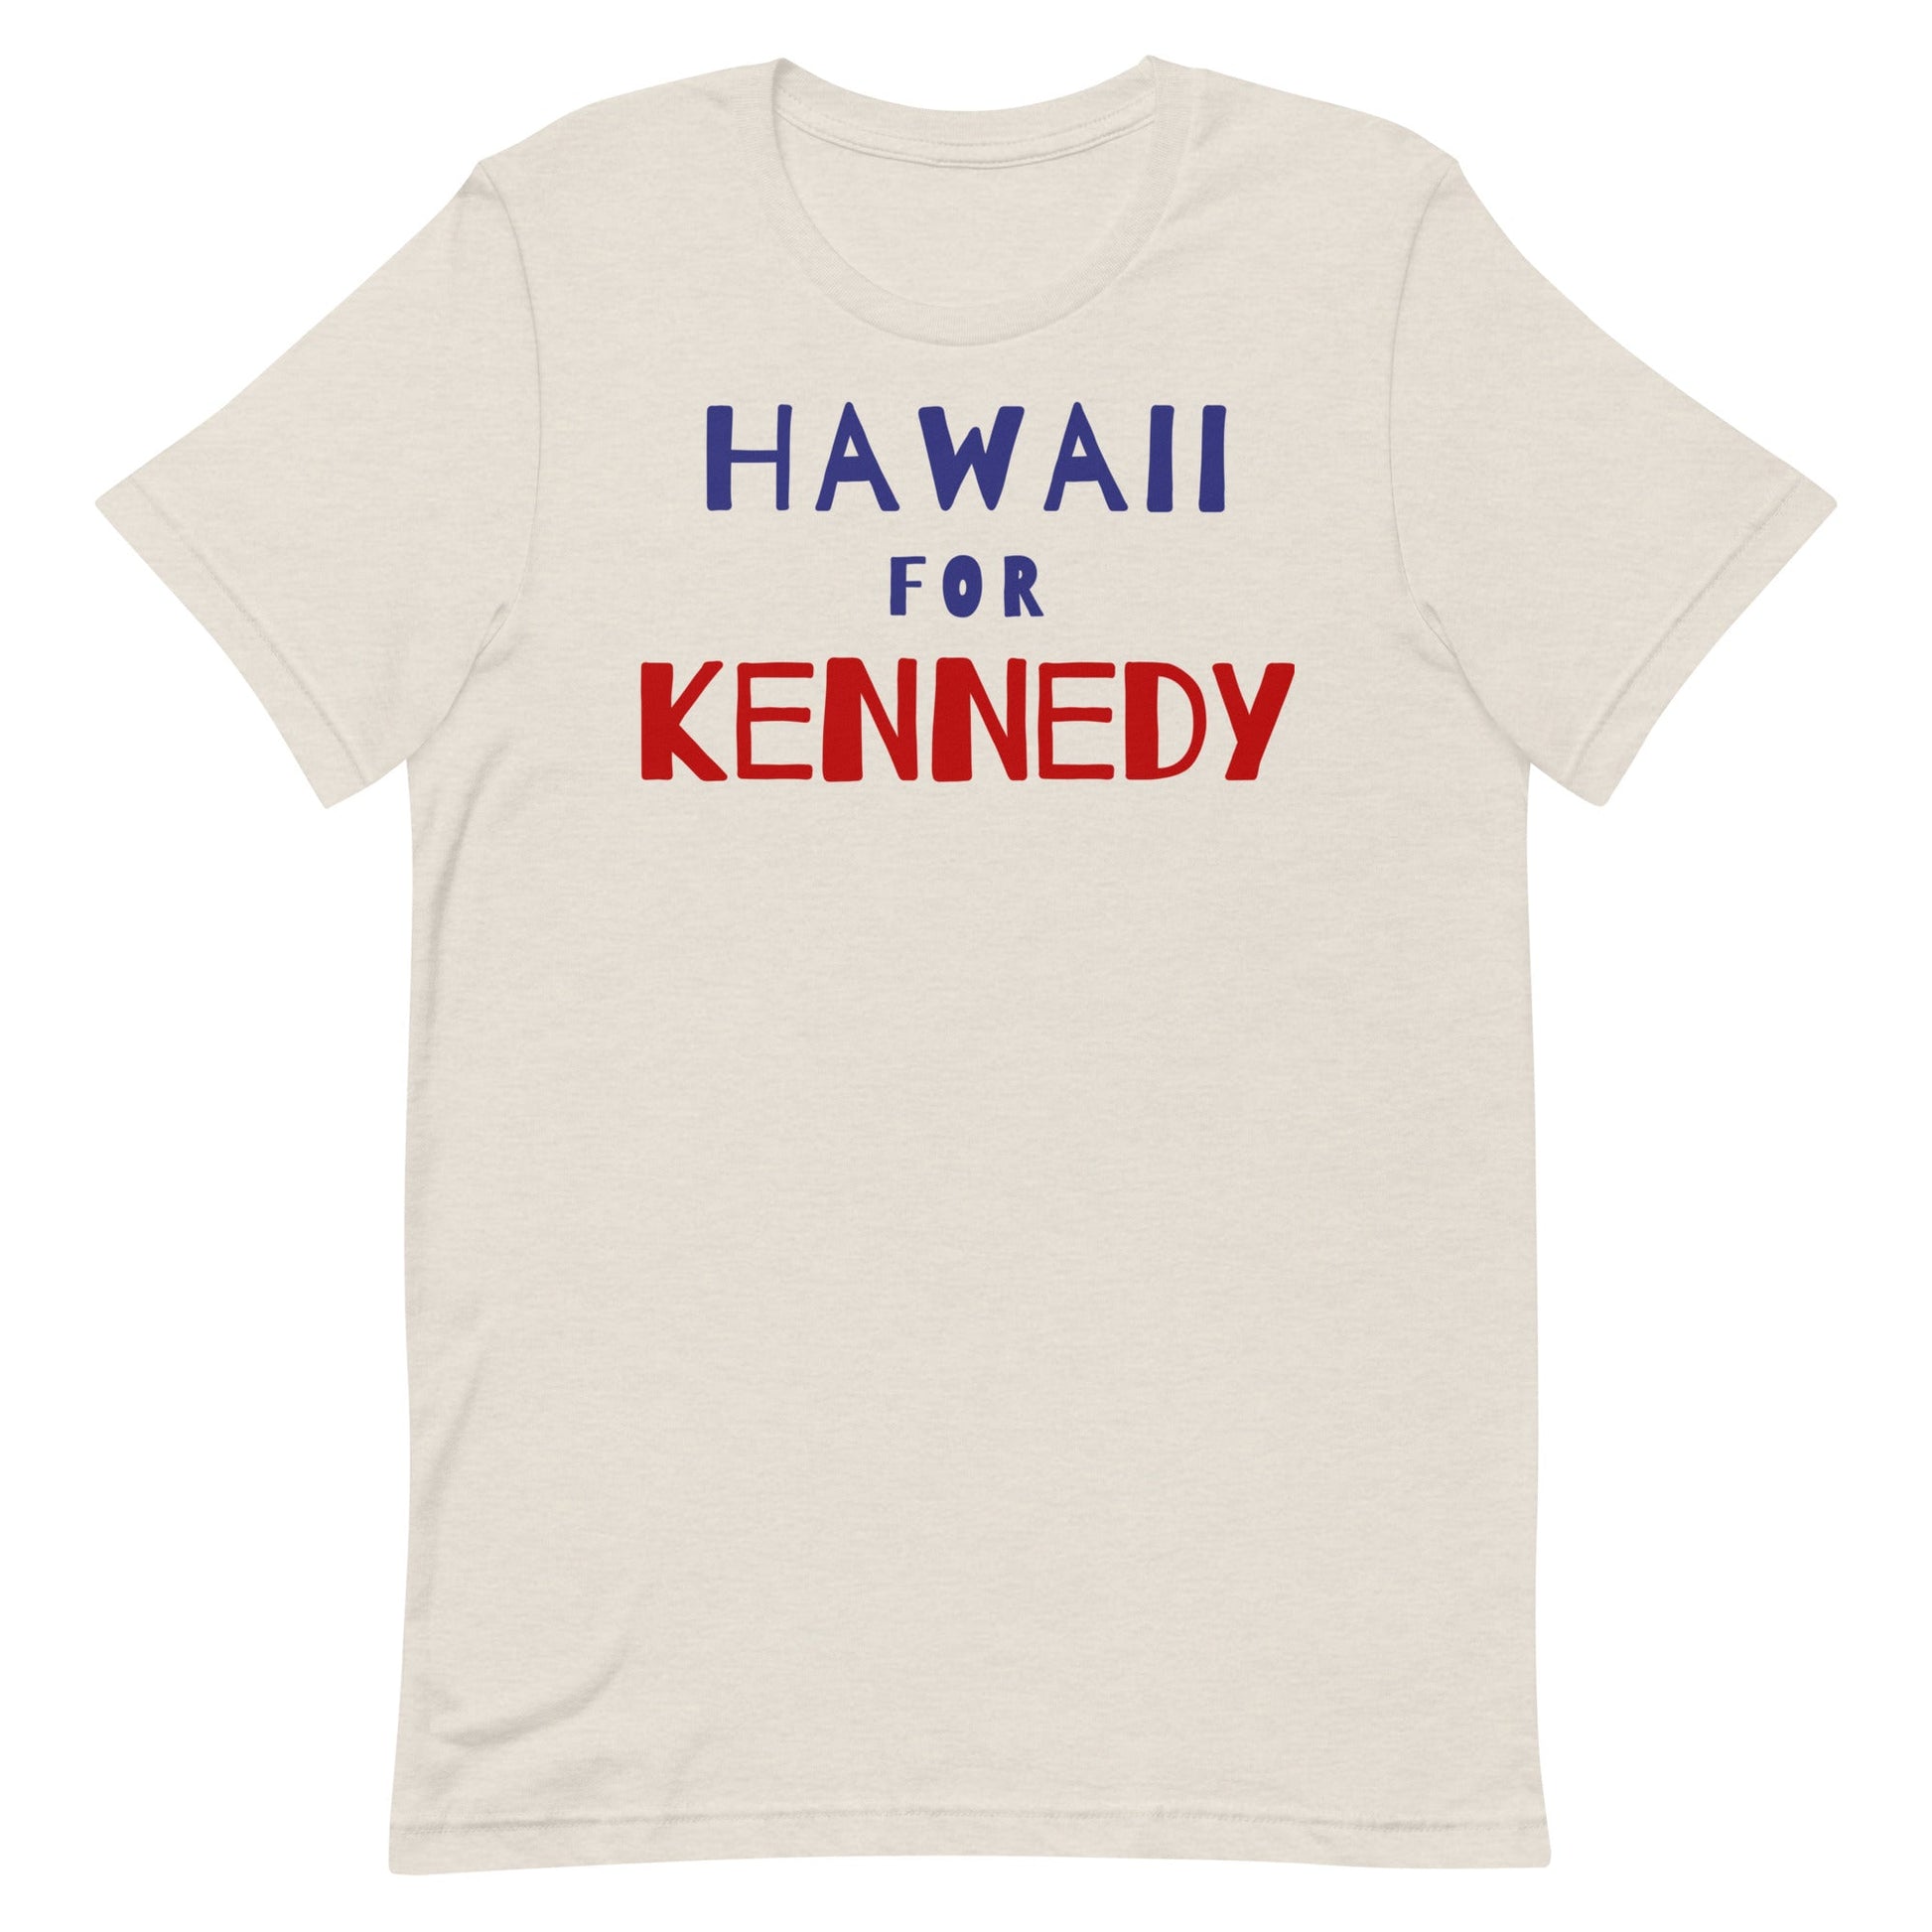 Hawaii for Kennedy Unisex Tee - TEAM KENNEDY. All rights reserved